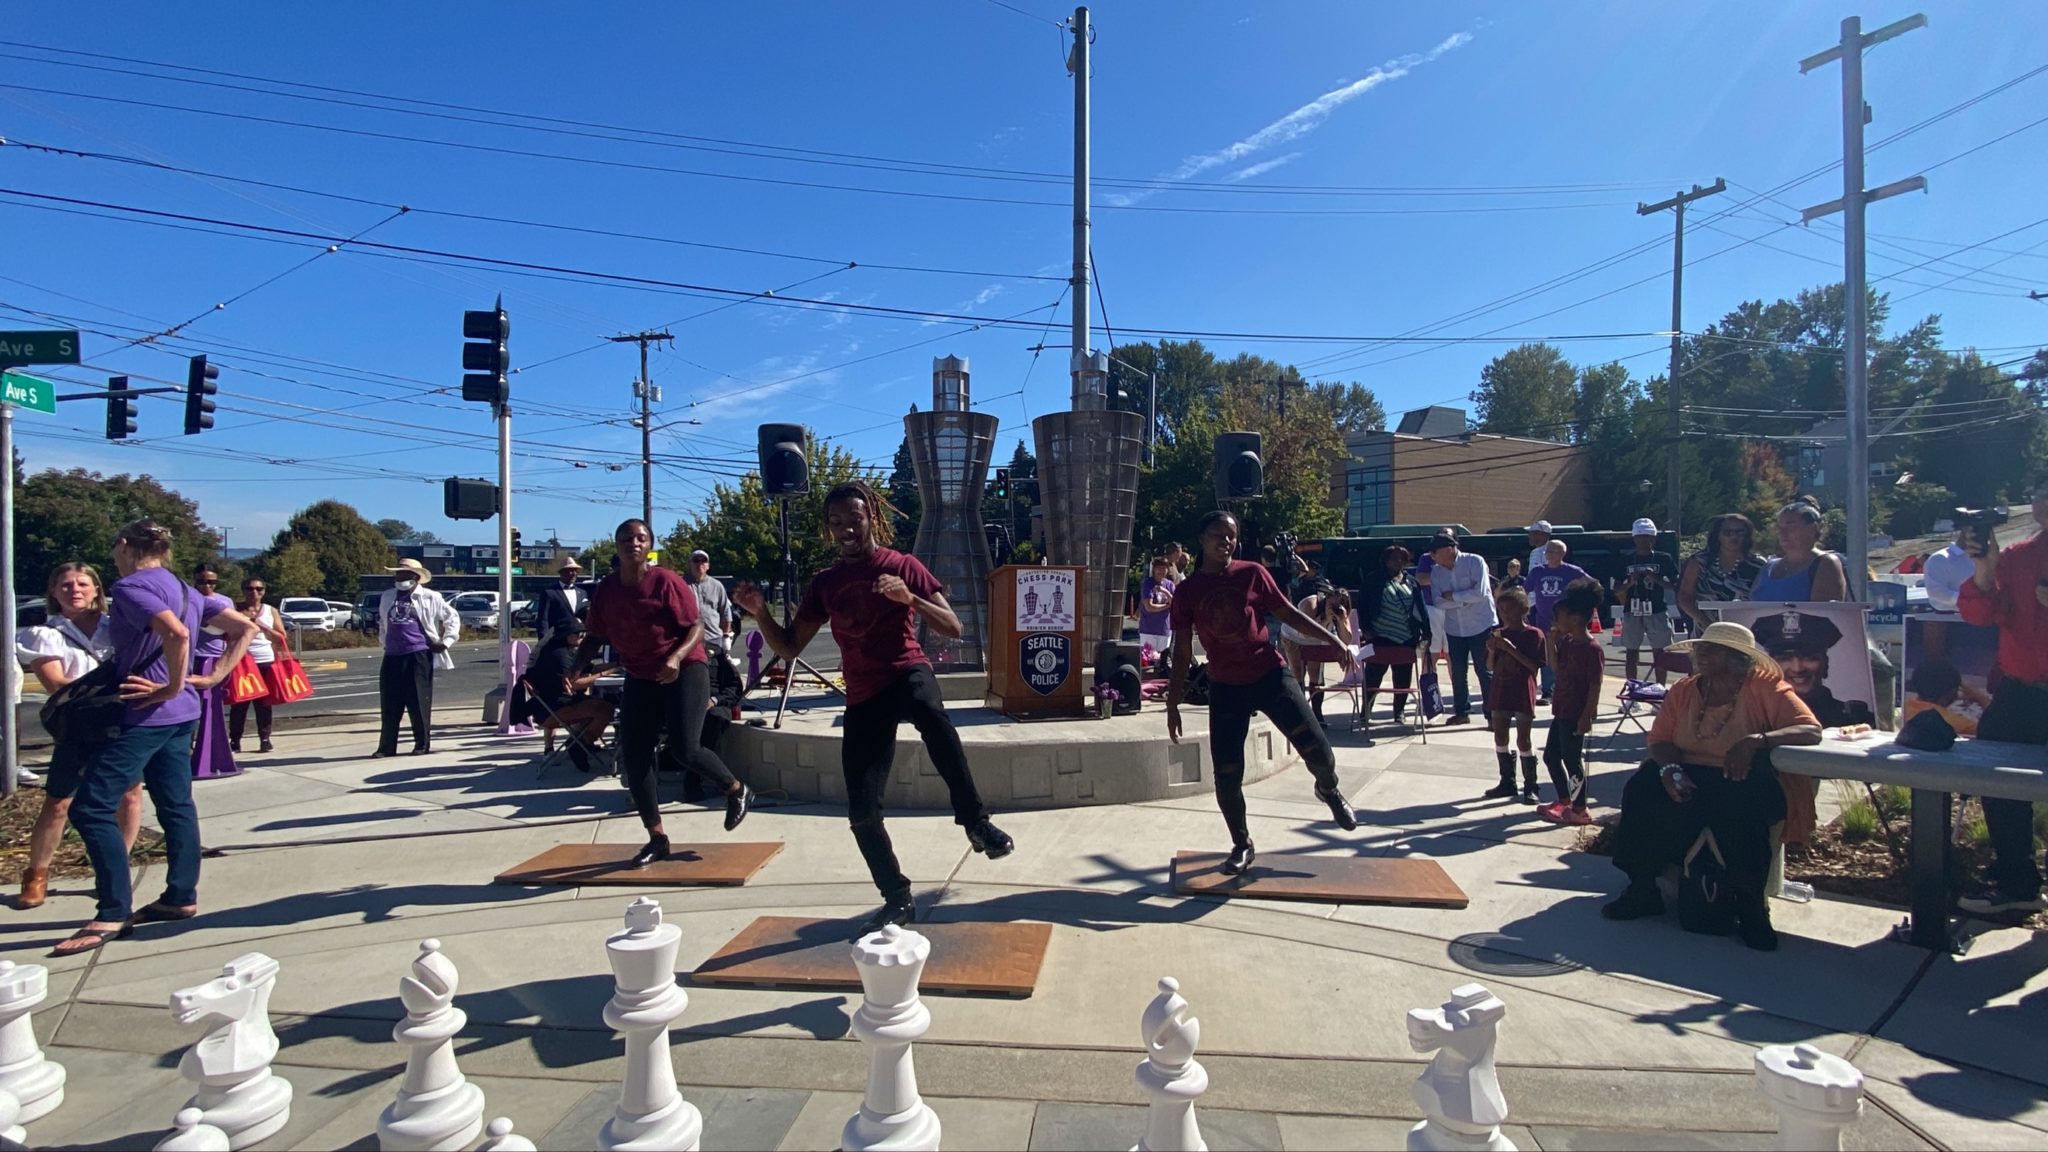 Northwest Tap Connection dancers perform at the new park, as part of the community celebration. Three tap dancers are dancing on wooden boards, with large chess pieces in the foreground, and people watching the performance.